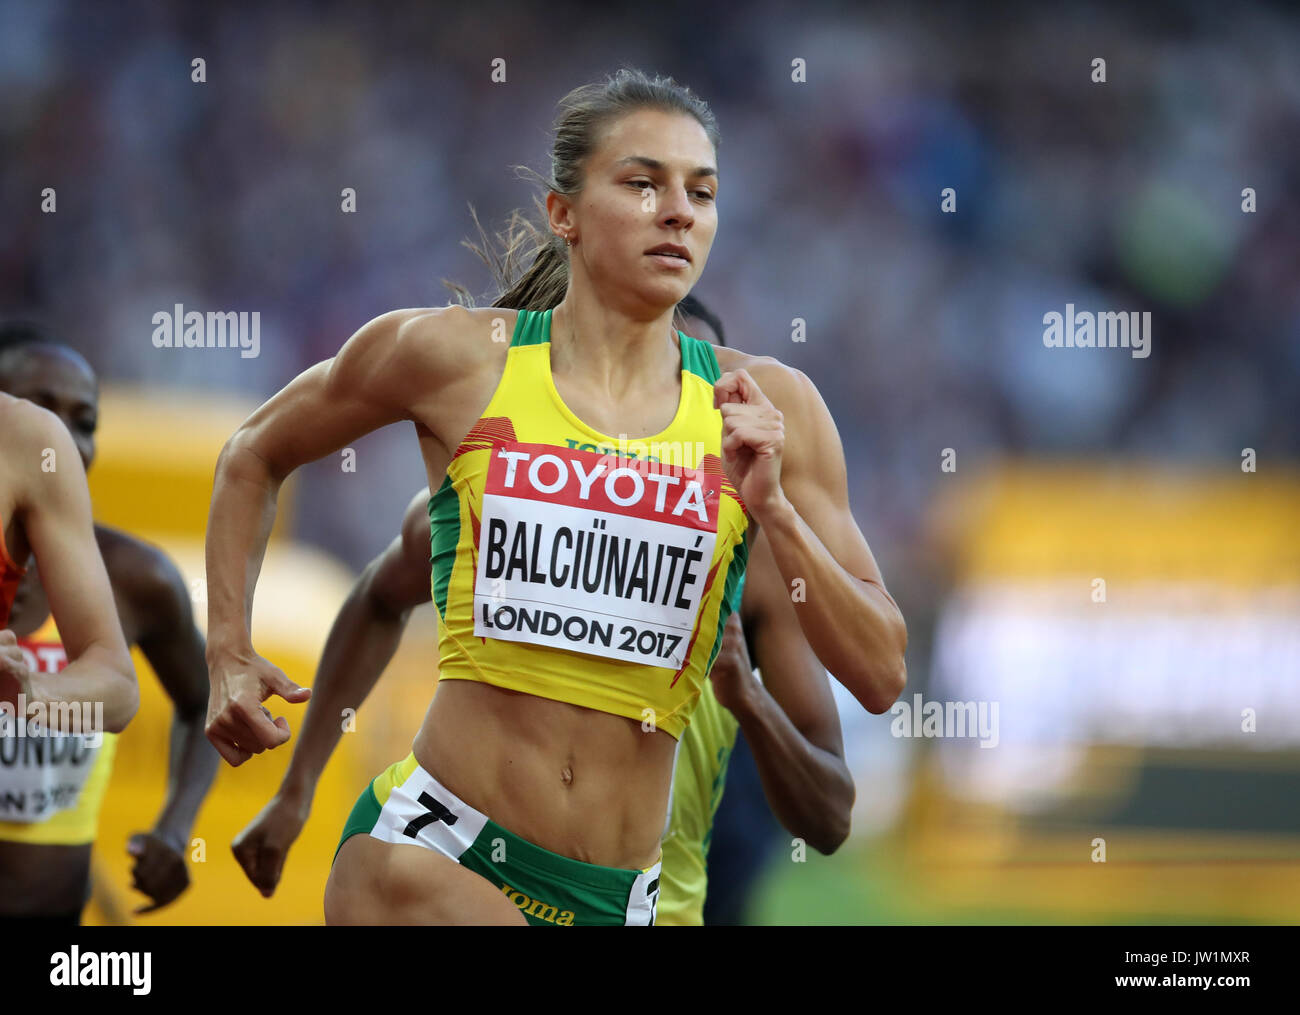 Lithuania's Egle Balciunaite in action during the Women's 800m heat one during day seven of the 2017 IAAF World Championships at the London Stadium. Stock Photo